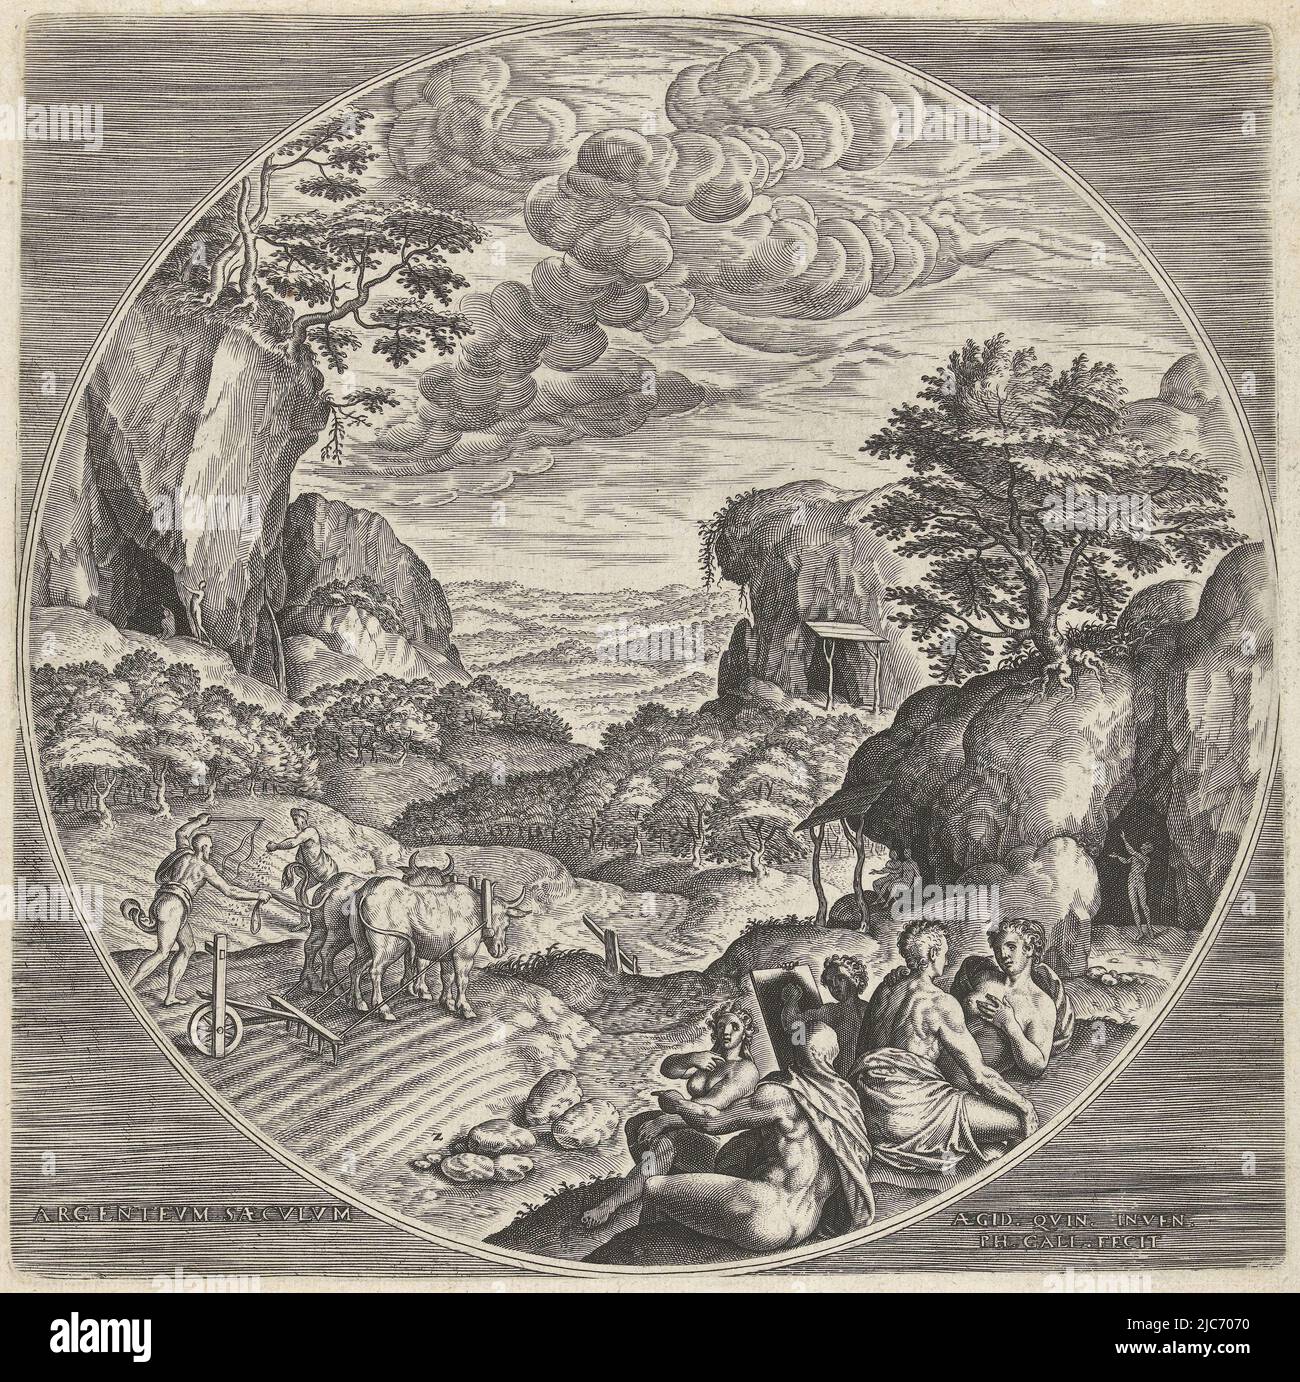 In a circular frame the Silver Age of Jupiter. In the foreground some semi-clothed people are practicing the arts. In the background, a field is being plowed and people are building homes in caves. The print refers to the mythologically inspired idea that during the Silver Age man had to deal with the seasons. People now had to work the land, seek shelter in houses and protect themselves from the cold. There was also talk for the first time of practicing the seven liberal arts. The print is part of a series on the four ages and has a Latin, French and Dutch caption., Silver Age Argenteum Stock Photo